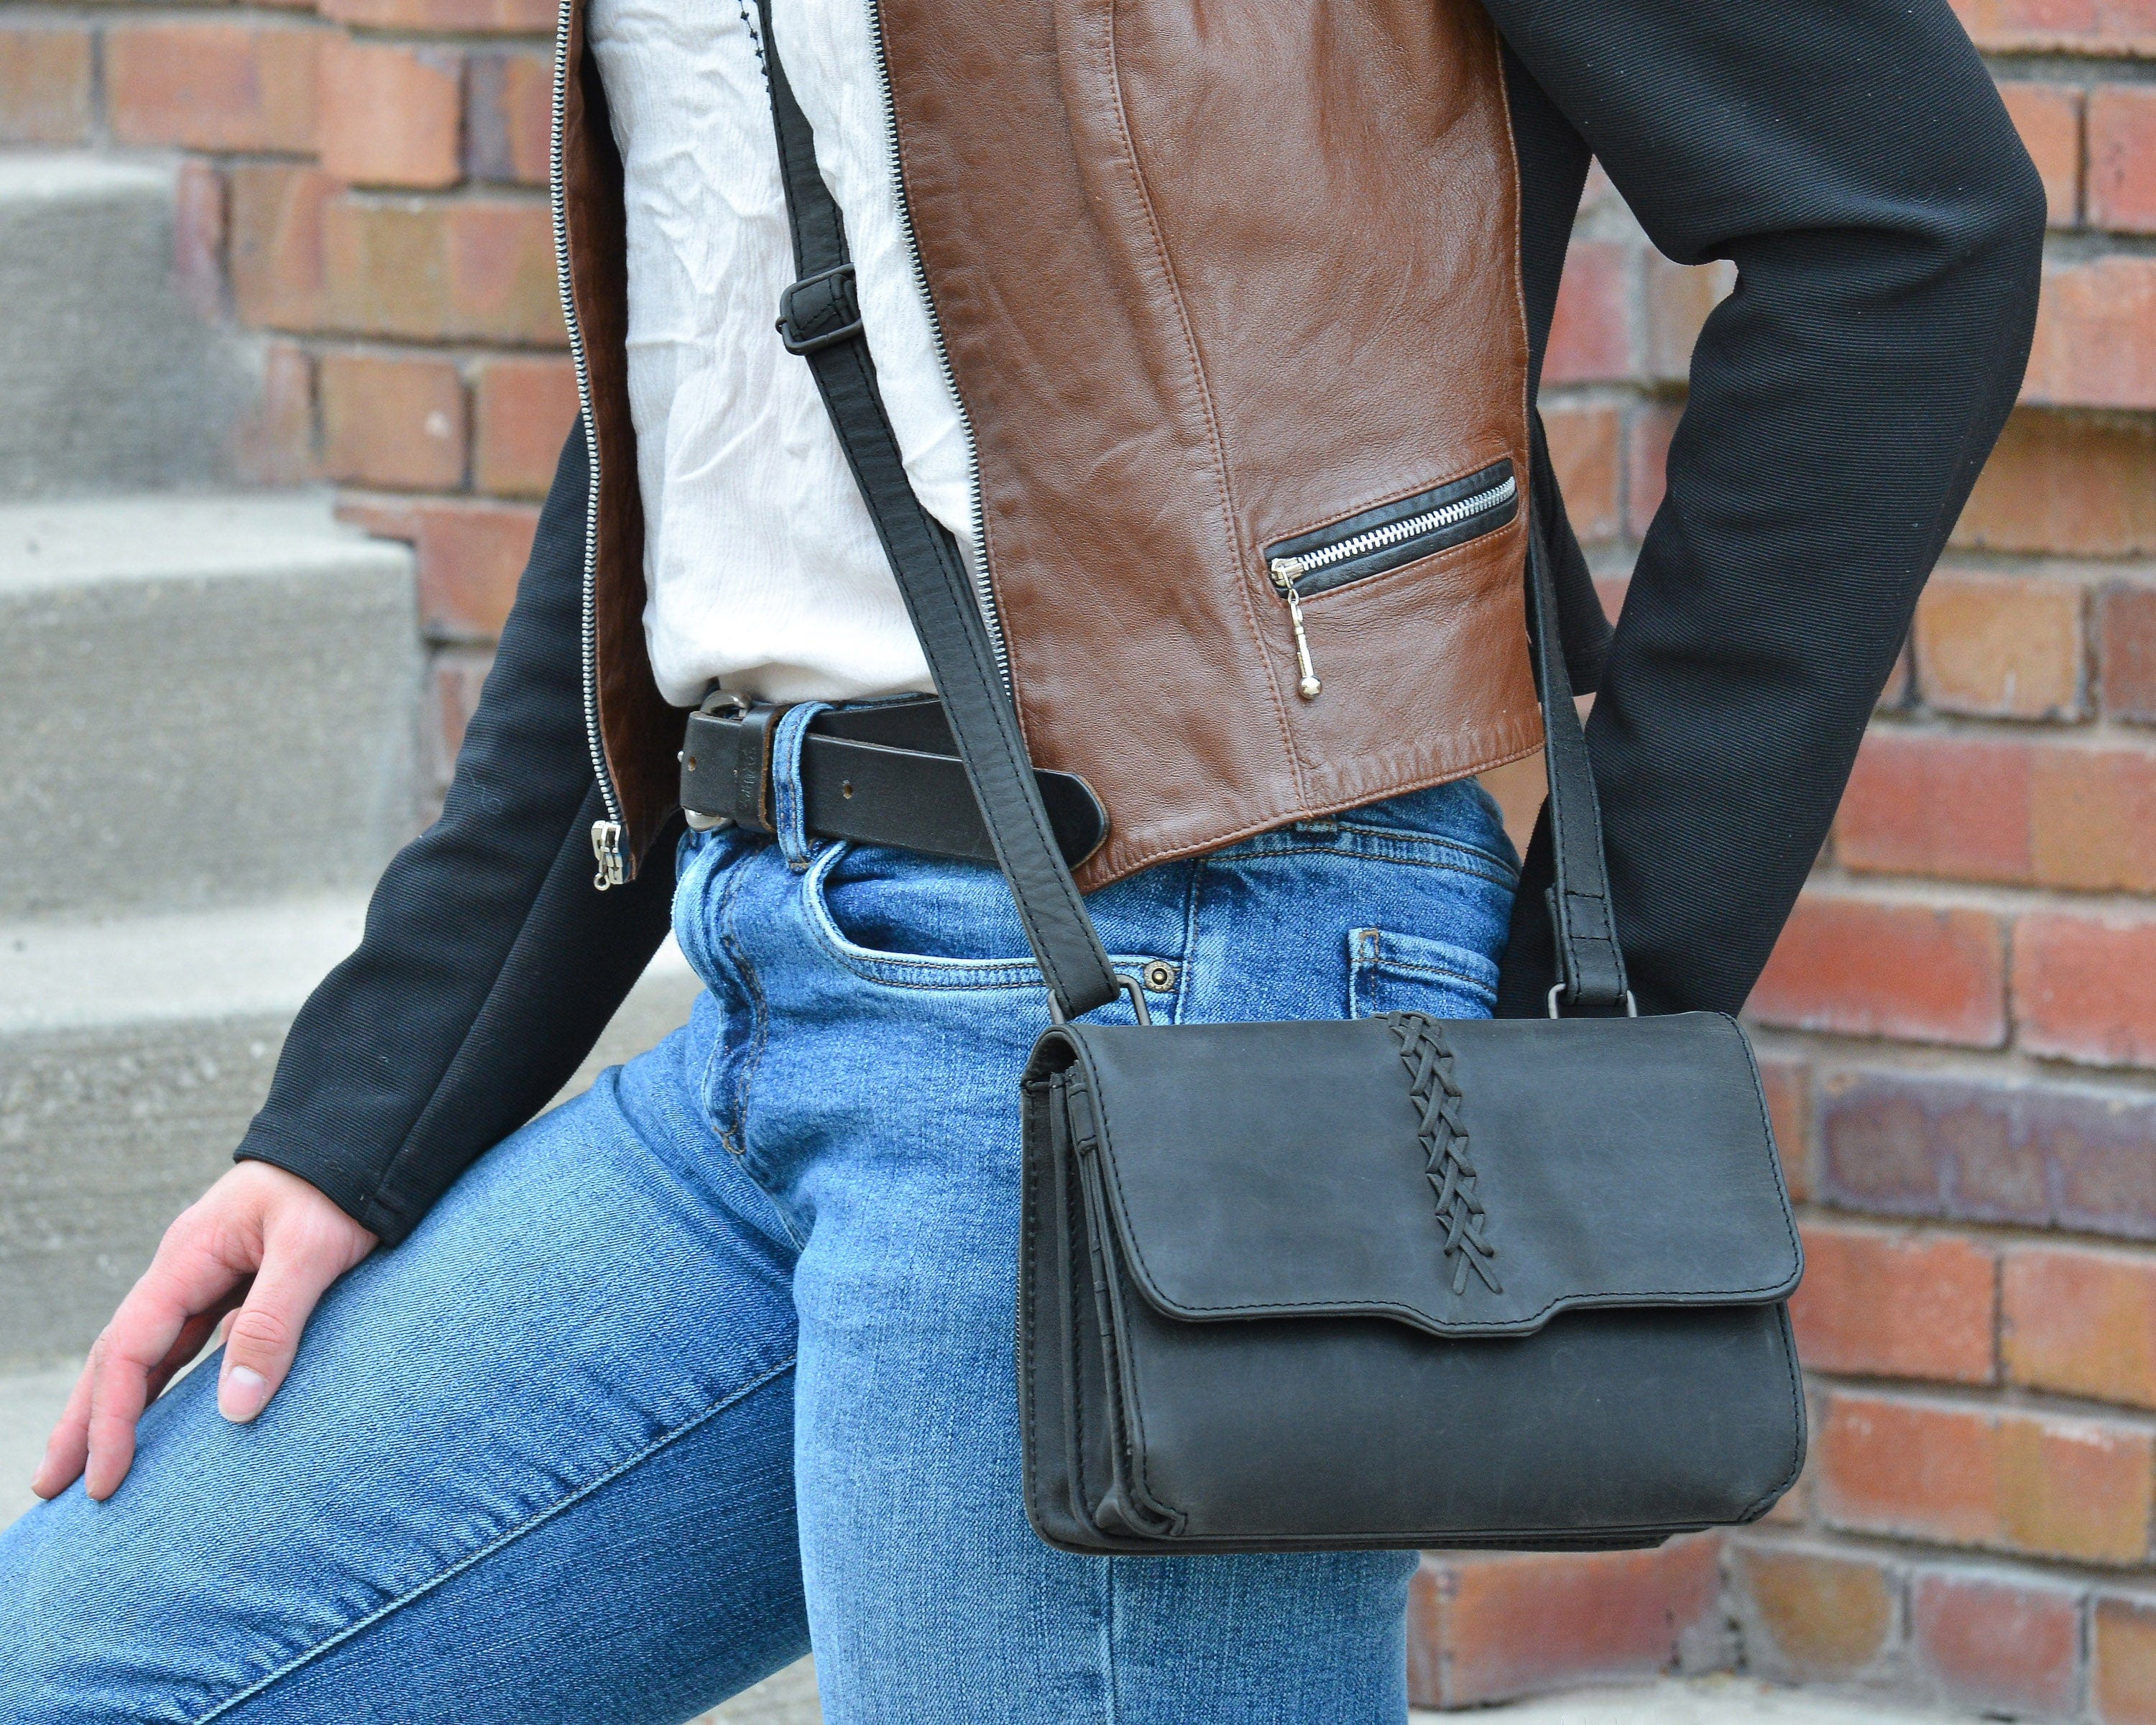 Conceal Carry Kailey Leather Purse Pack